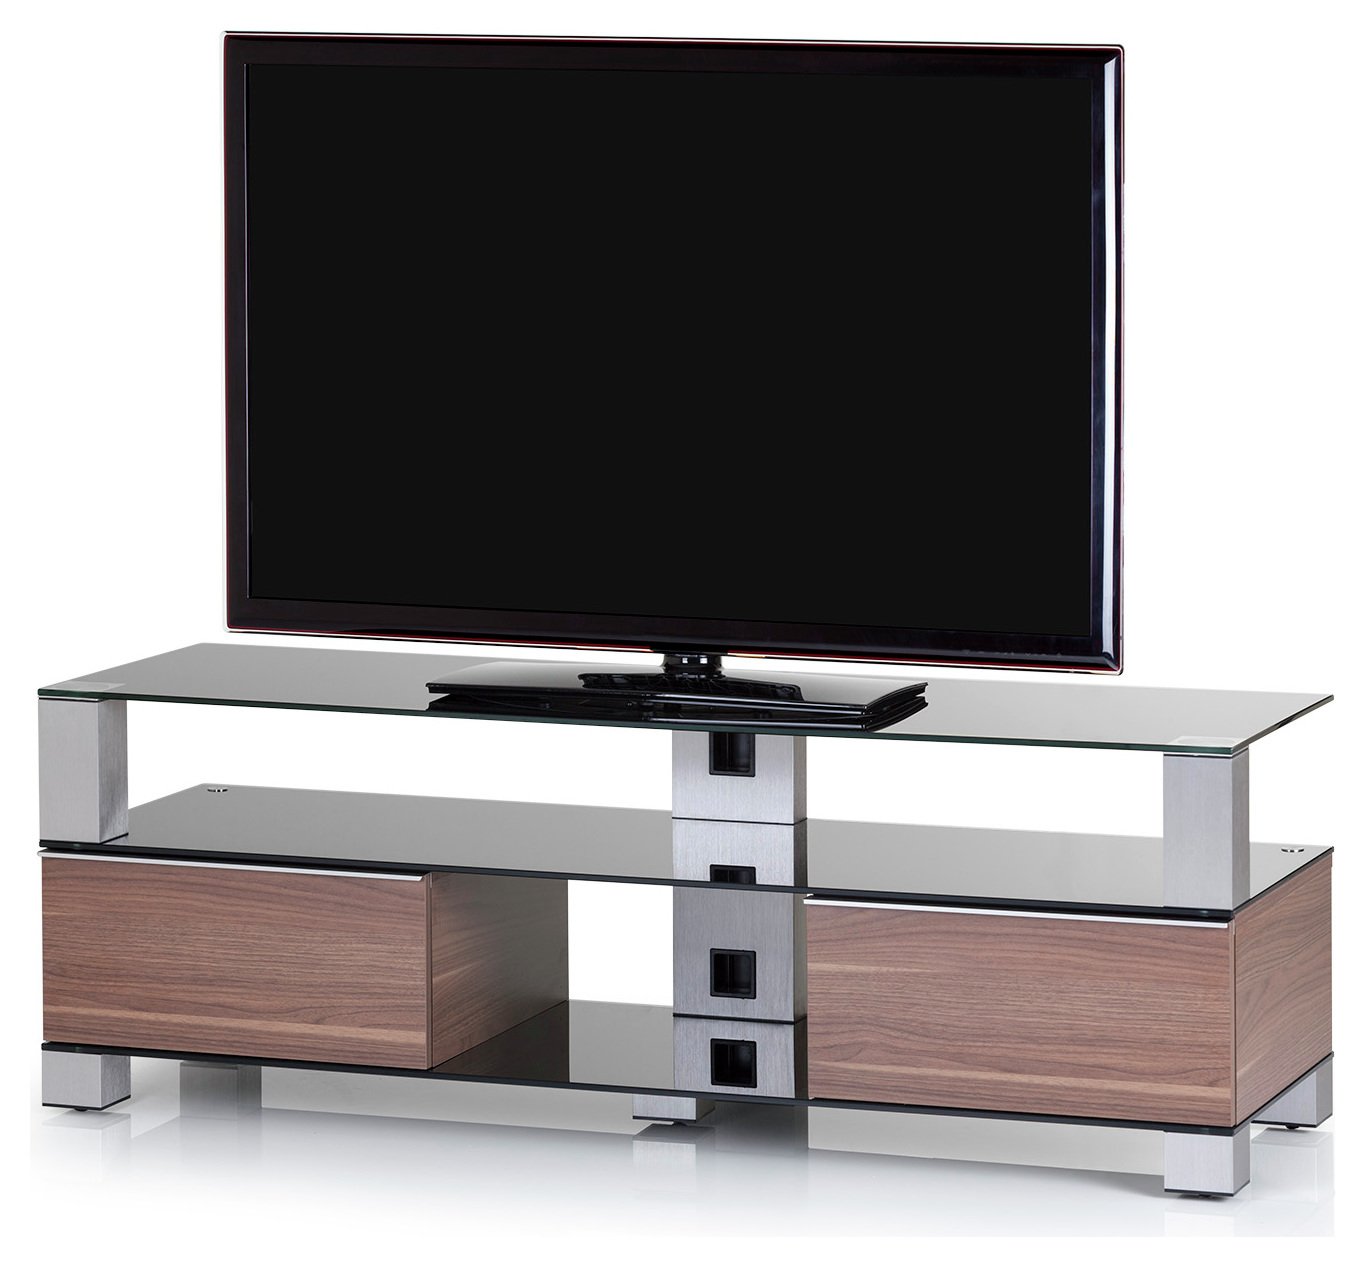 Sonorous TV and Media Cabinet review